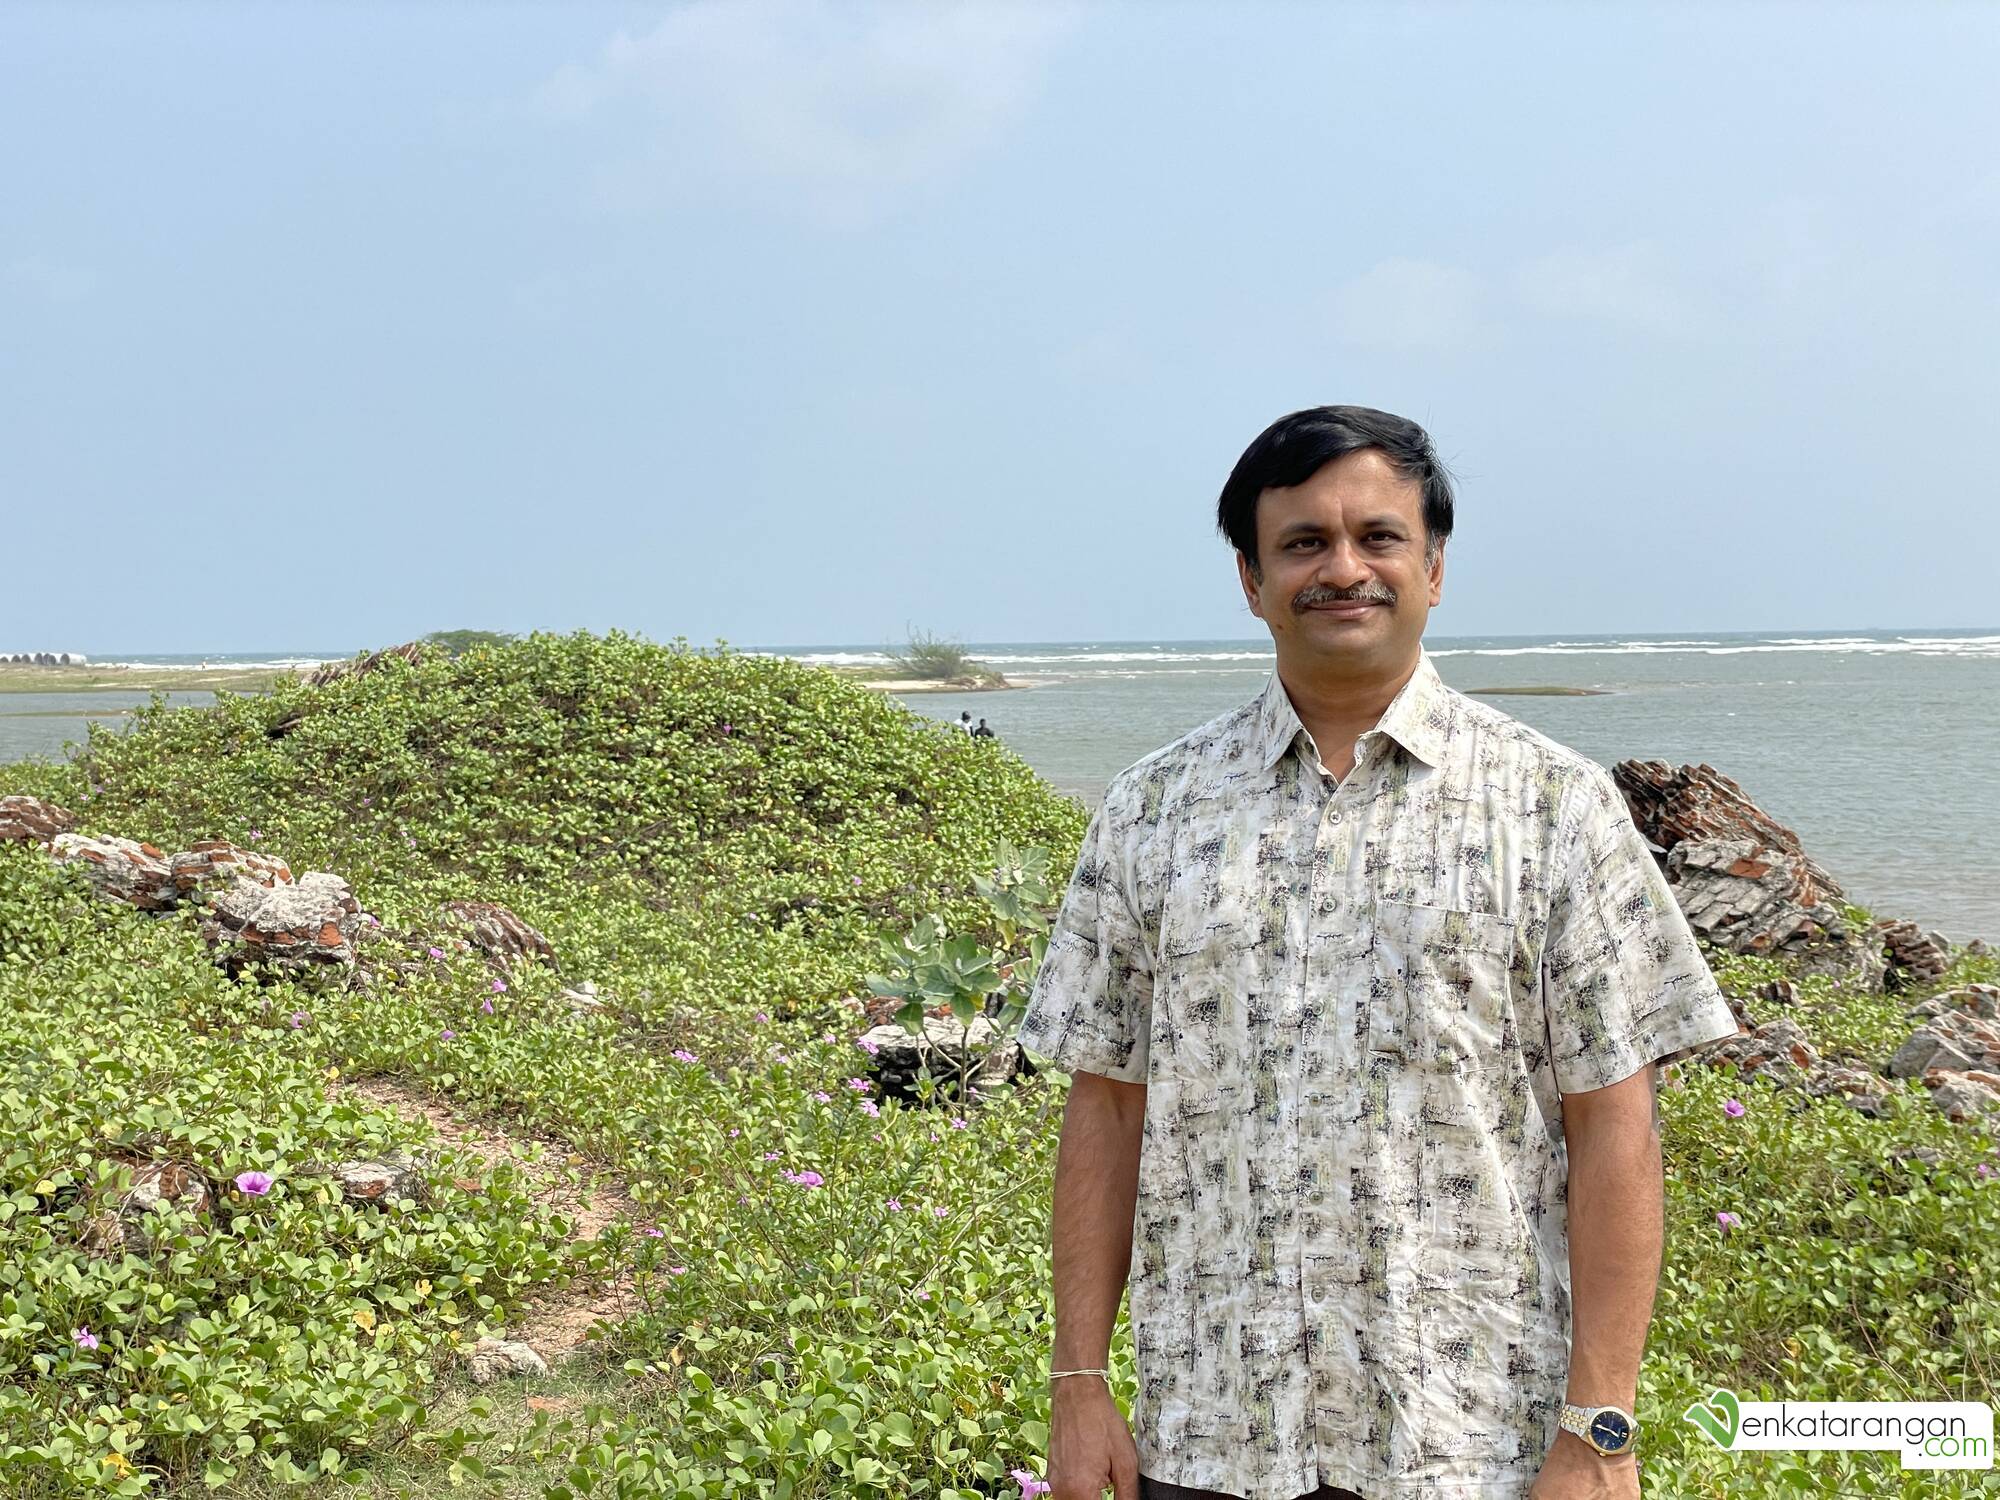 Venkatarangan posing for a picture with the backwaters behind me